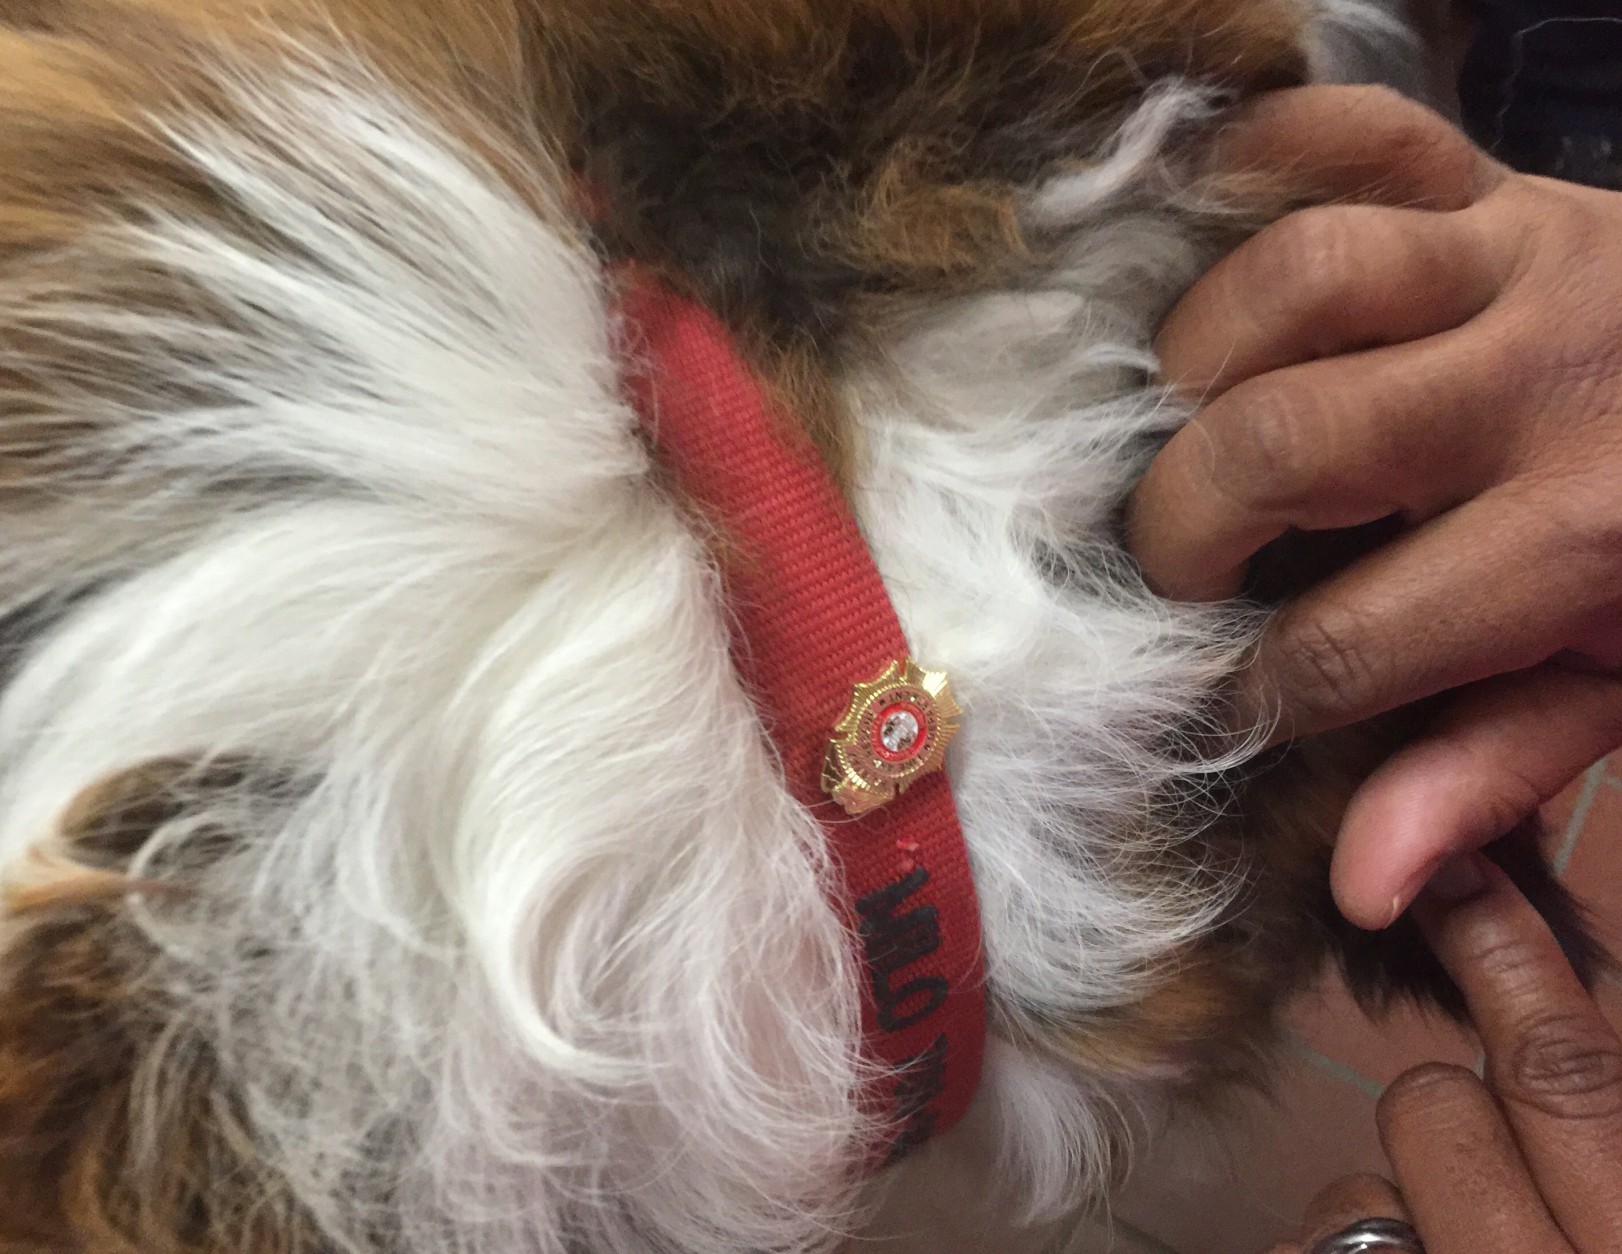 At the ceremony bringing together Milo and his rescuers, he received a Fairfax County Fire Rescue Department badge. "He's an honorary mascot here for the station," said Capt. Randy Bittinger of Station 32 in Burke Centre. (WTOP/Kristi King)